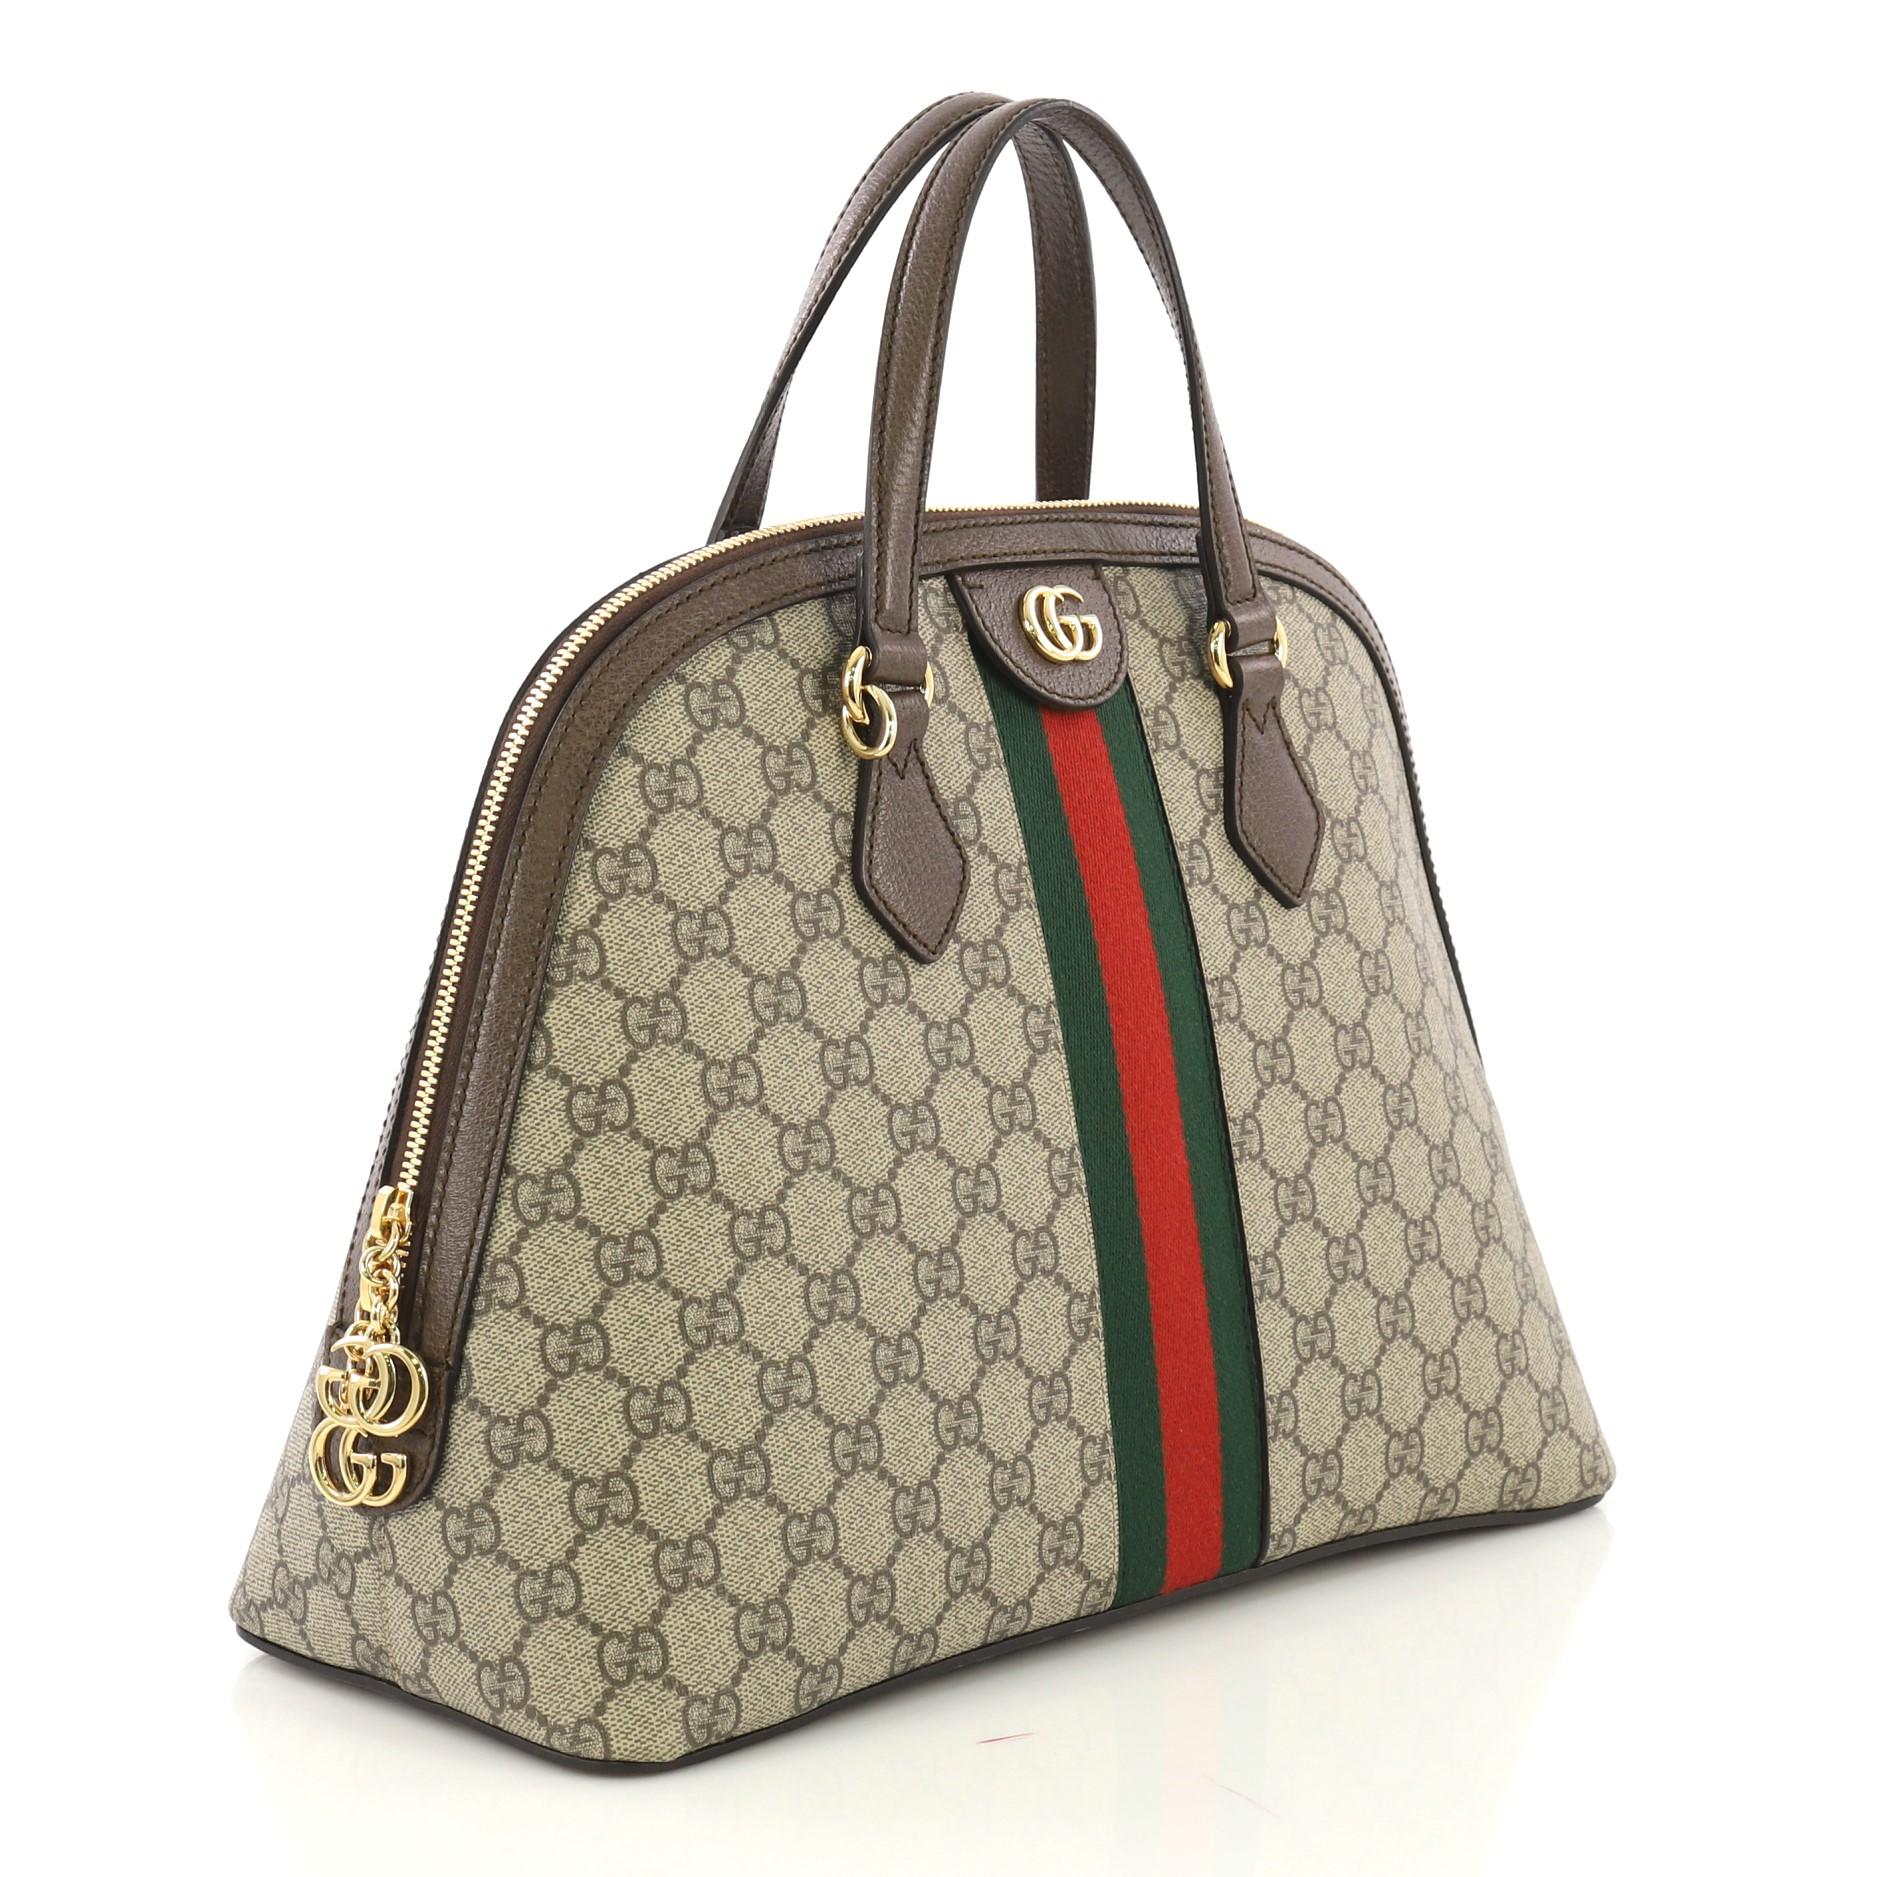 This Gucci Ophidia Dome Top Handle Bag GG Coated Canvas Medium, crafted in brown GG coated canvas, features dual leather handles, web stripe detail, and gold-tone hardware. Its zip closure opens to a nude microfiber interior with side zip and slip